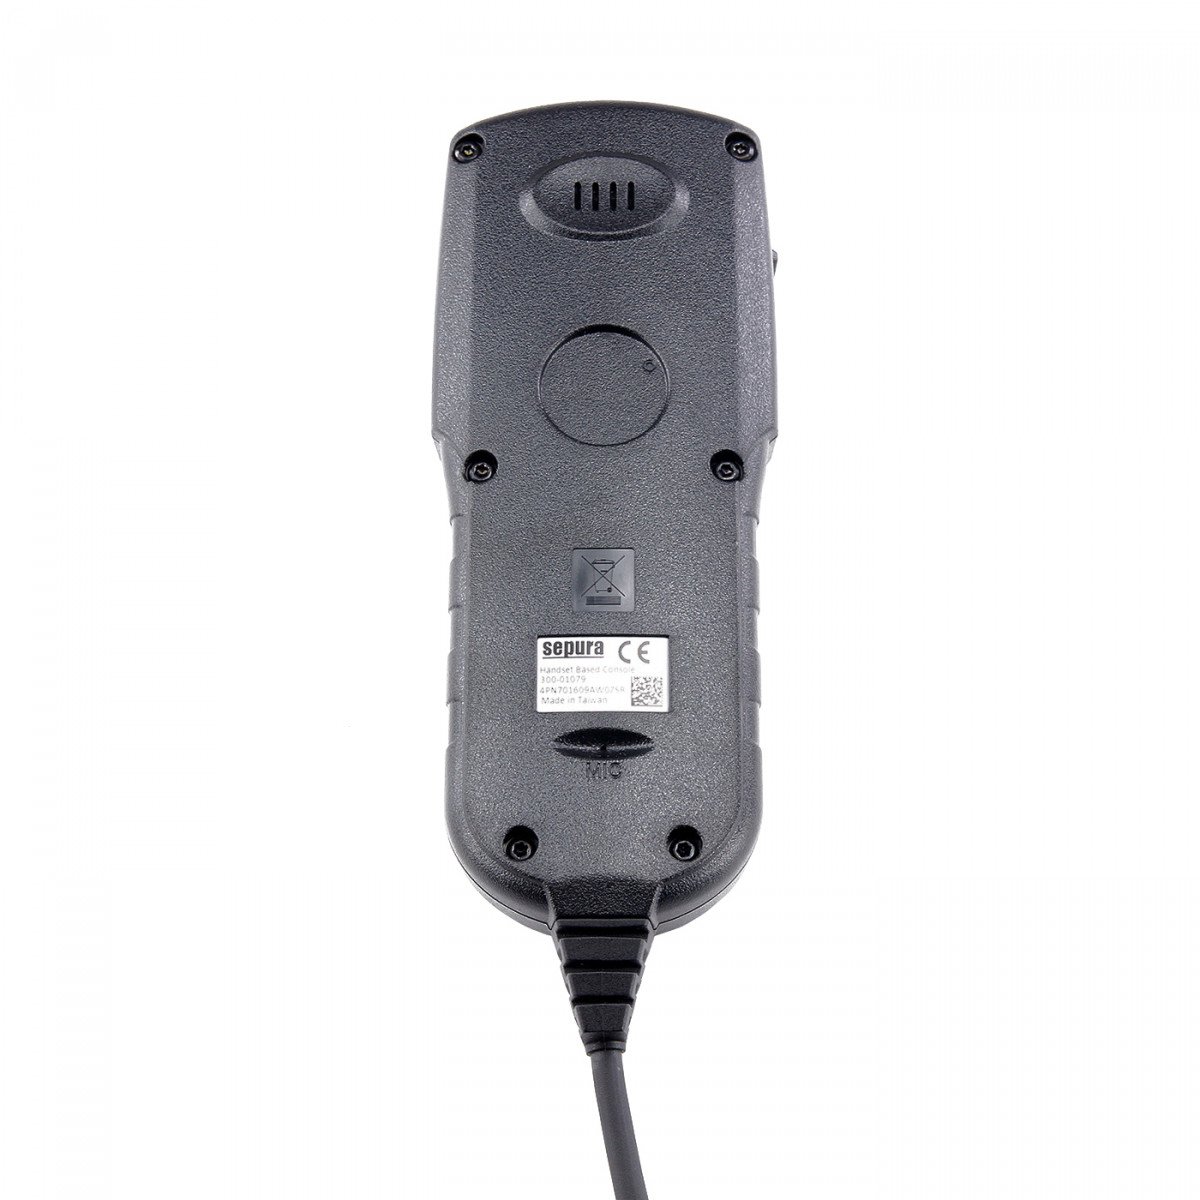 SEPURA HBC3 colour handset, single, required for SRG3900 SW version 10.20 or higher 300-01801